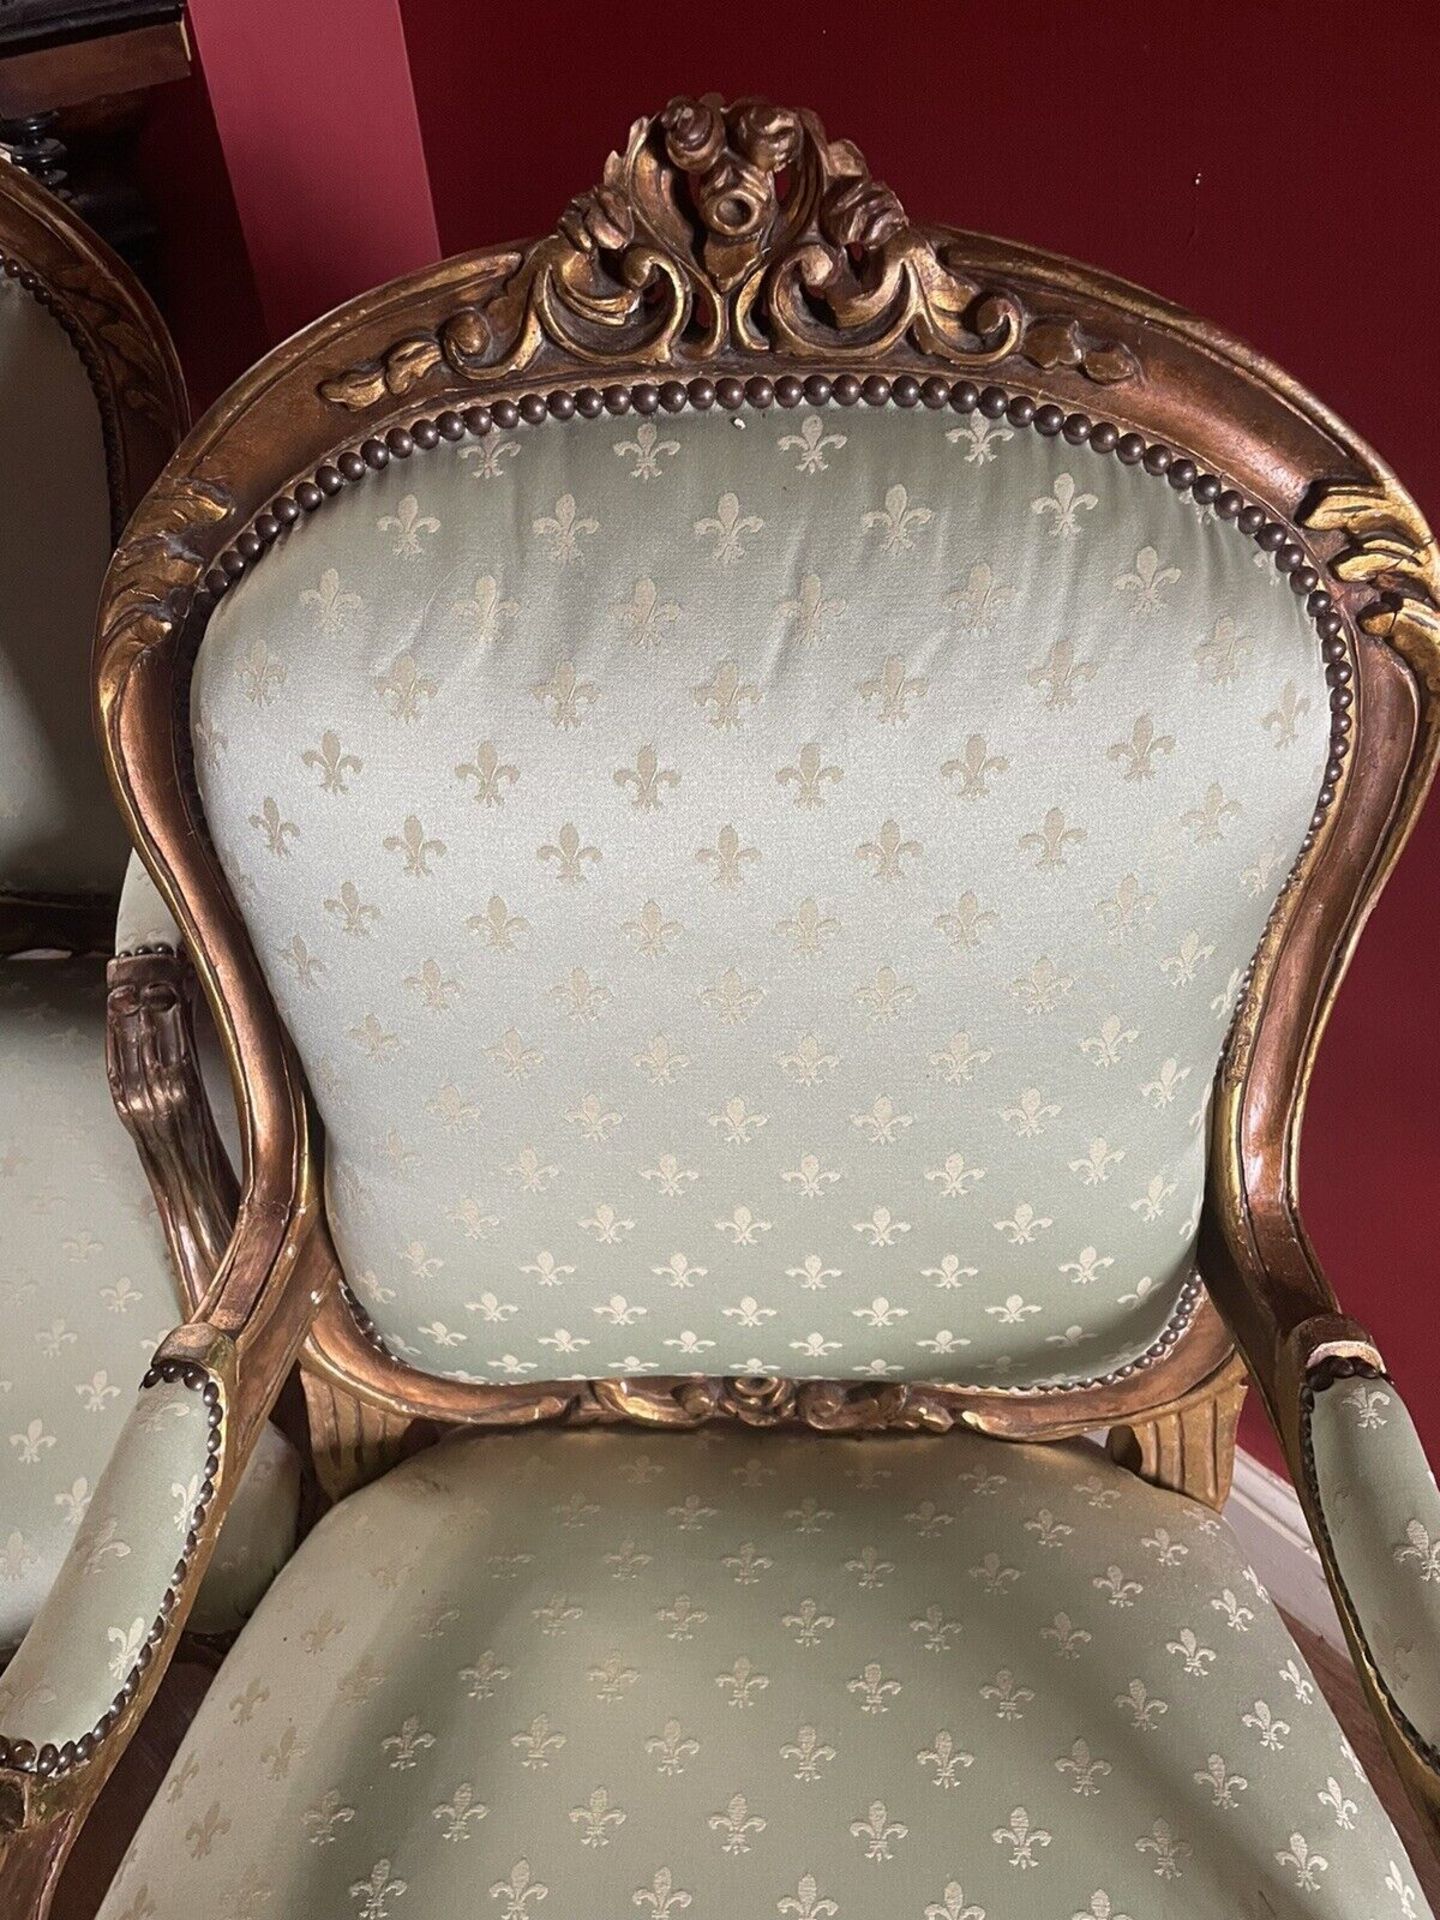 A Pair of Fauteuils In Louis XVI Style Carved Gilt Wood Arm Chairs Upholstered In Fleur De Lys - Image 5 of 10